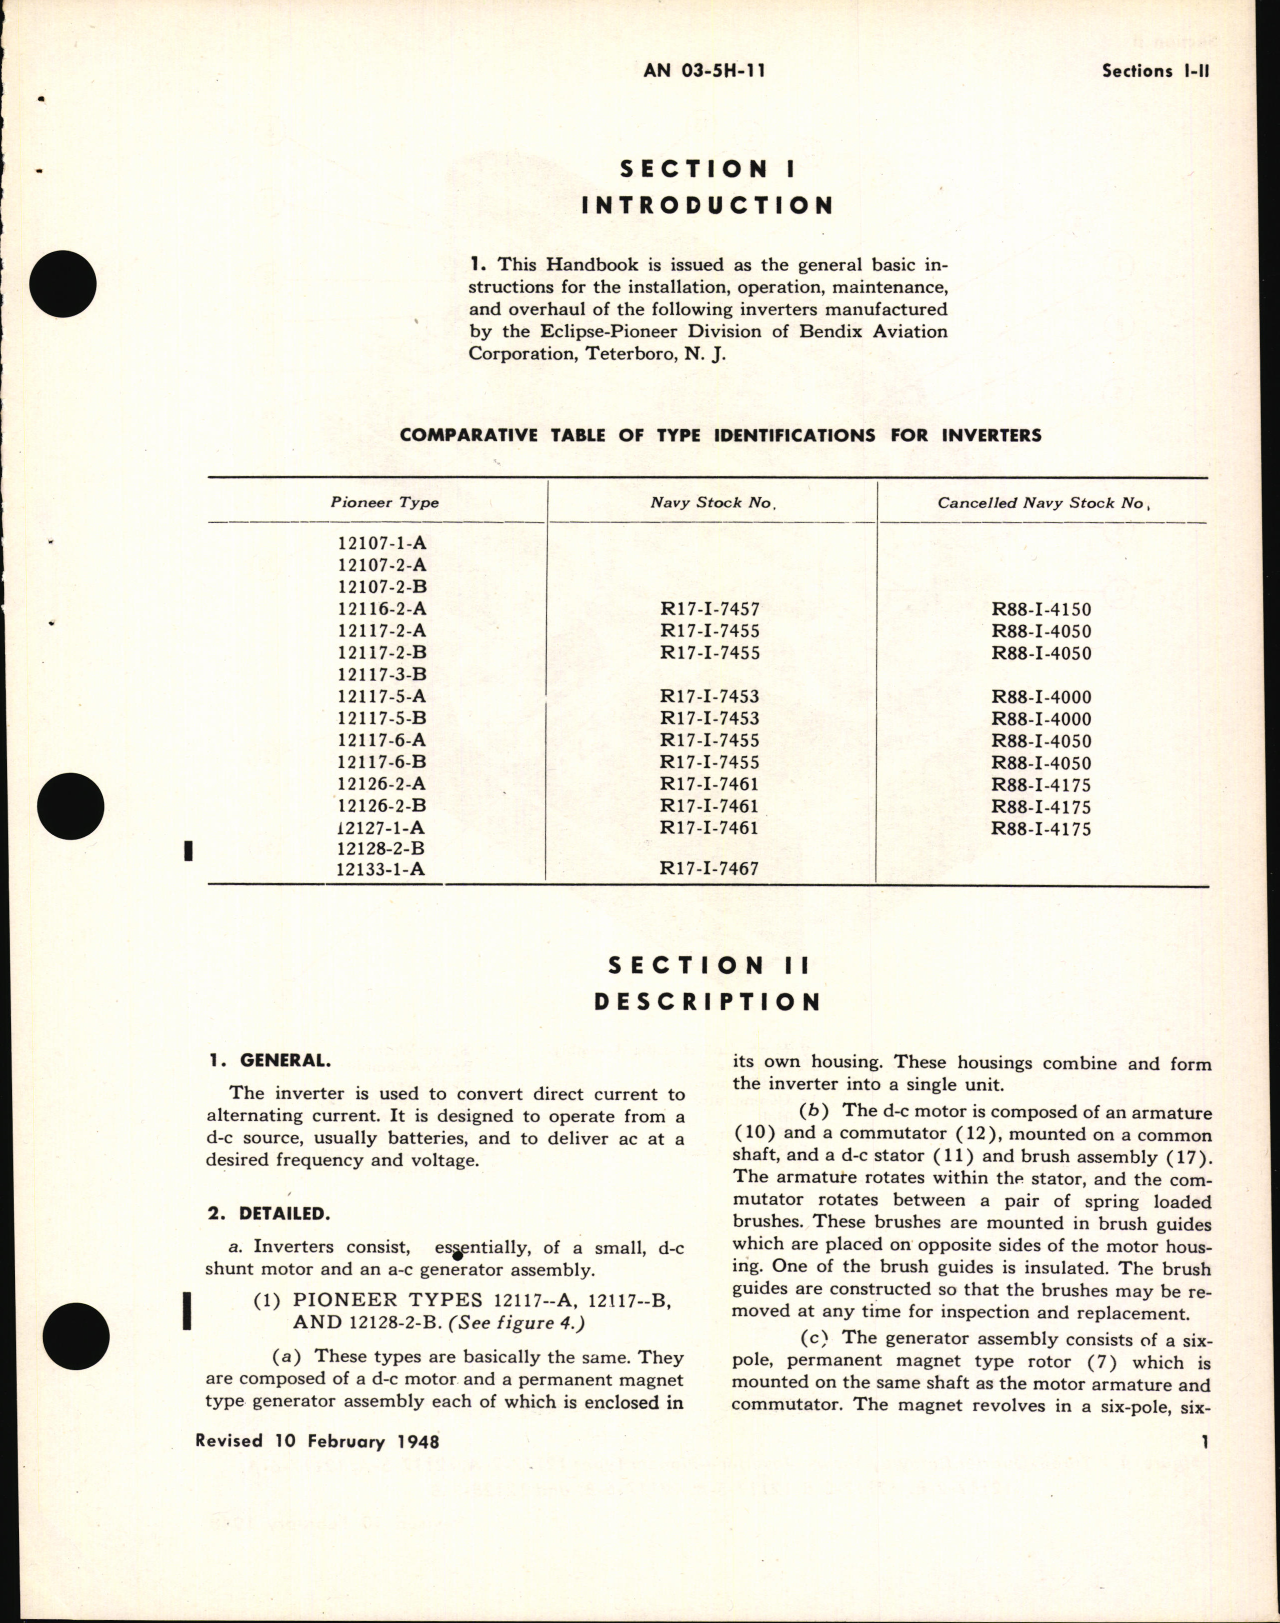 Sample page 7 from AirCorps Library document: Operation, Service & Overhaul Instructions with Parts Catalog for Pioneer Inverters